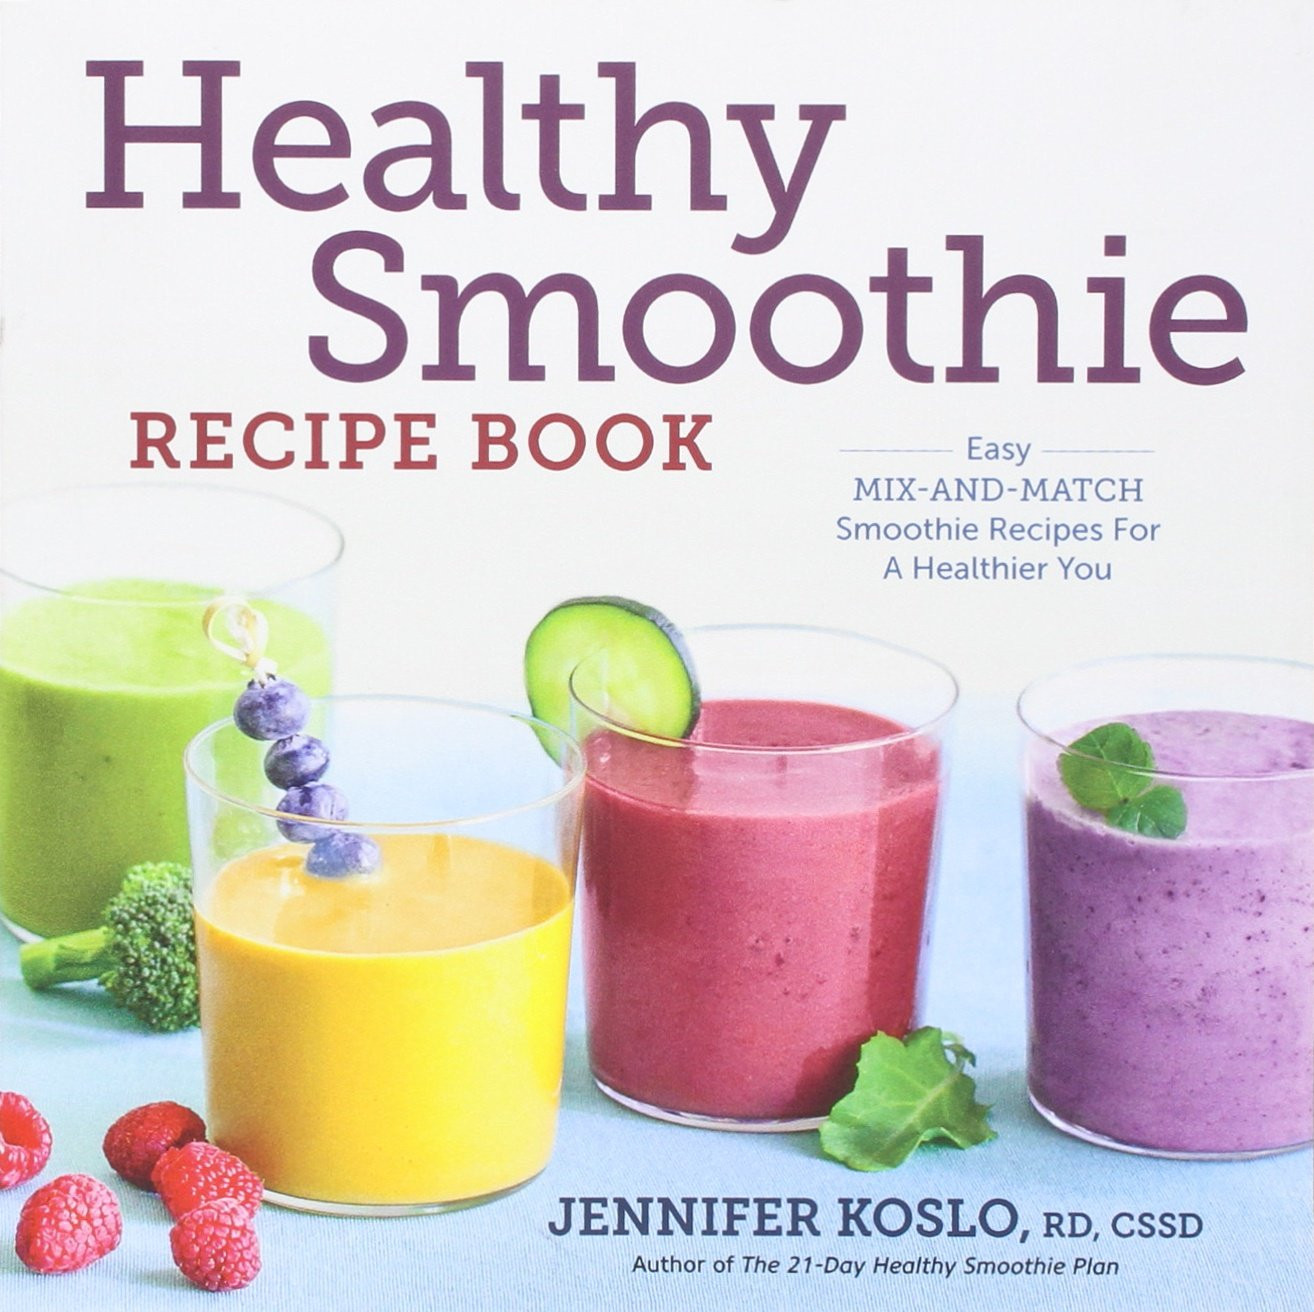 Easy Smoothie Recipes
 Healthy Smoothie Recipe Book Easy Mix and Match Smoothie